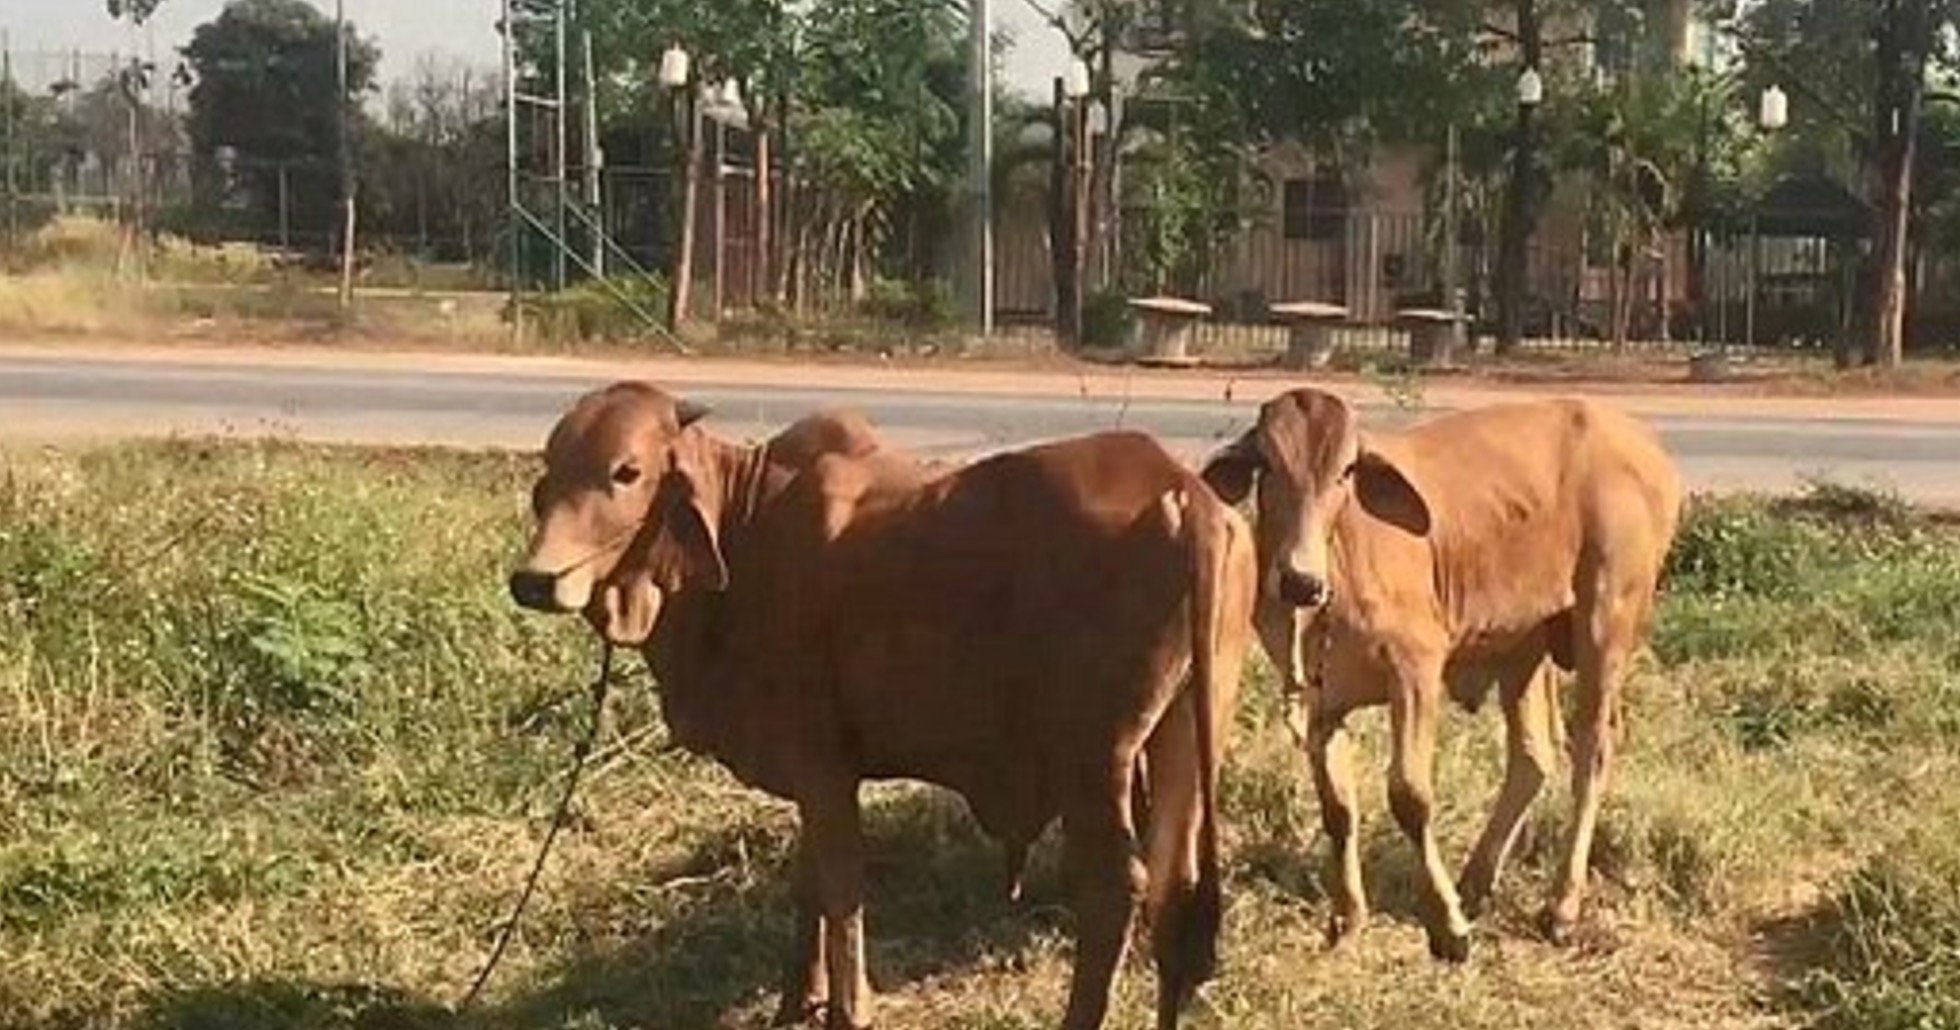 Thai man has sex with cow